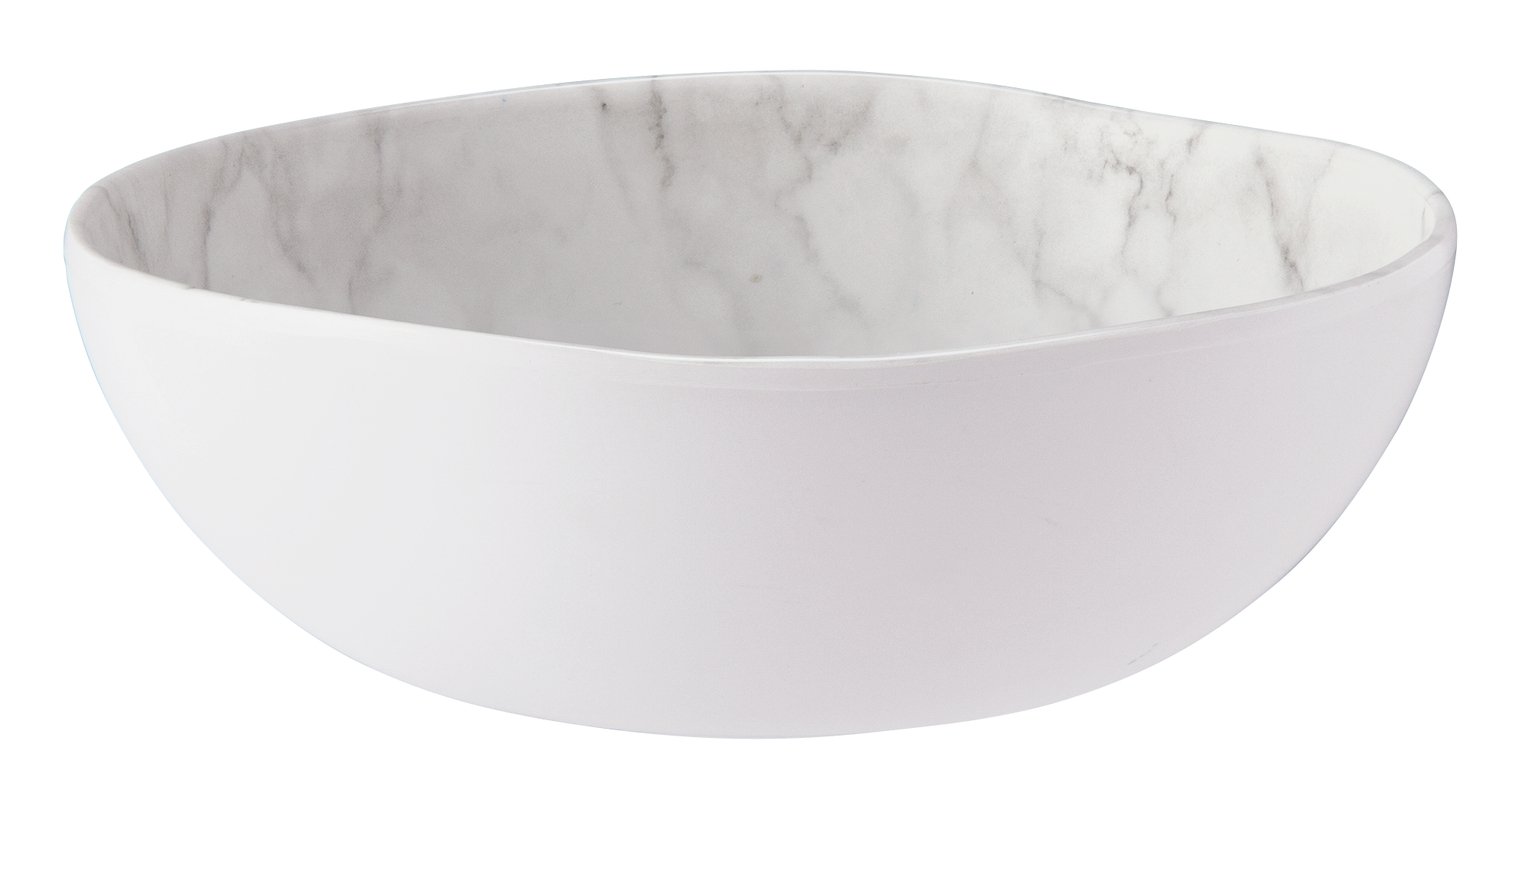 Argos Home Everyday Luxe Melamine Marble Pasta Bowl - 4 Pack